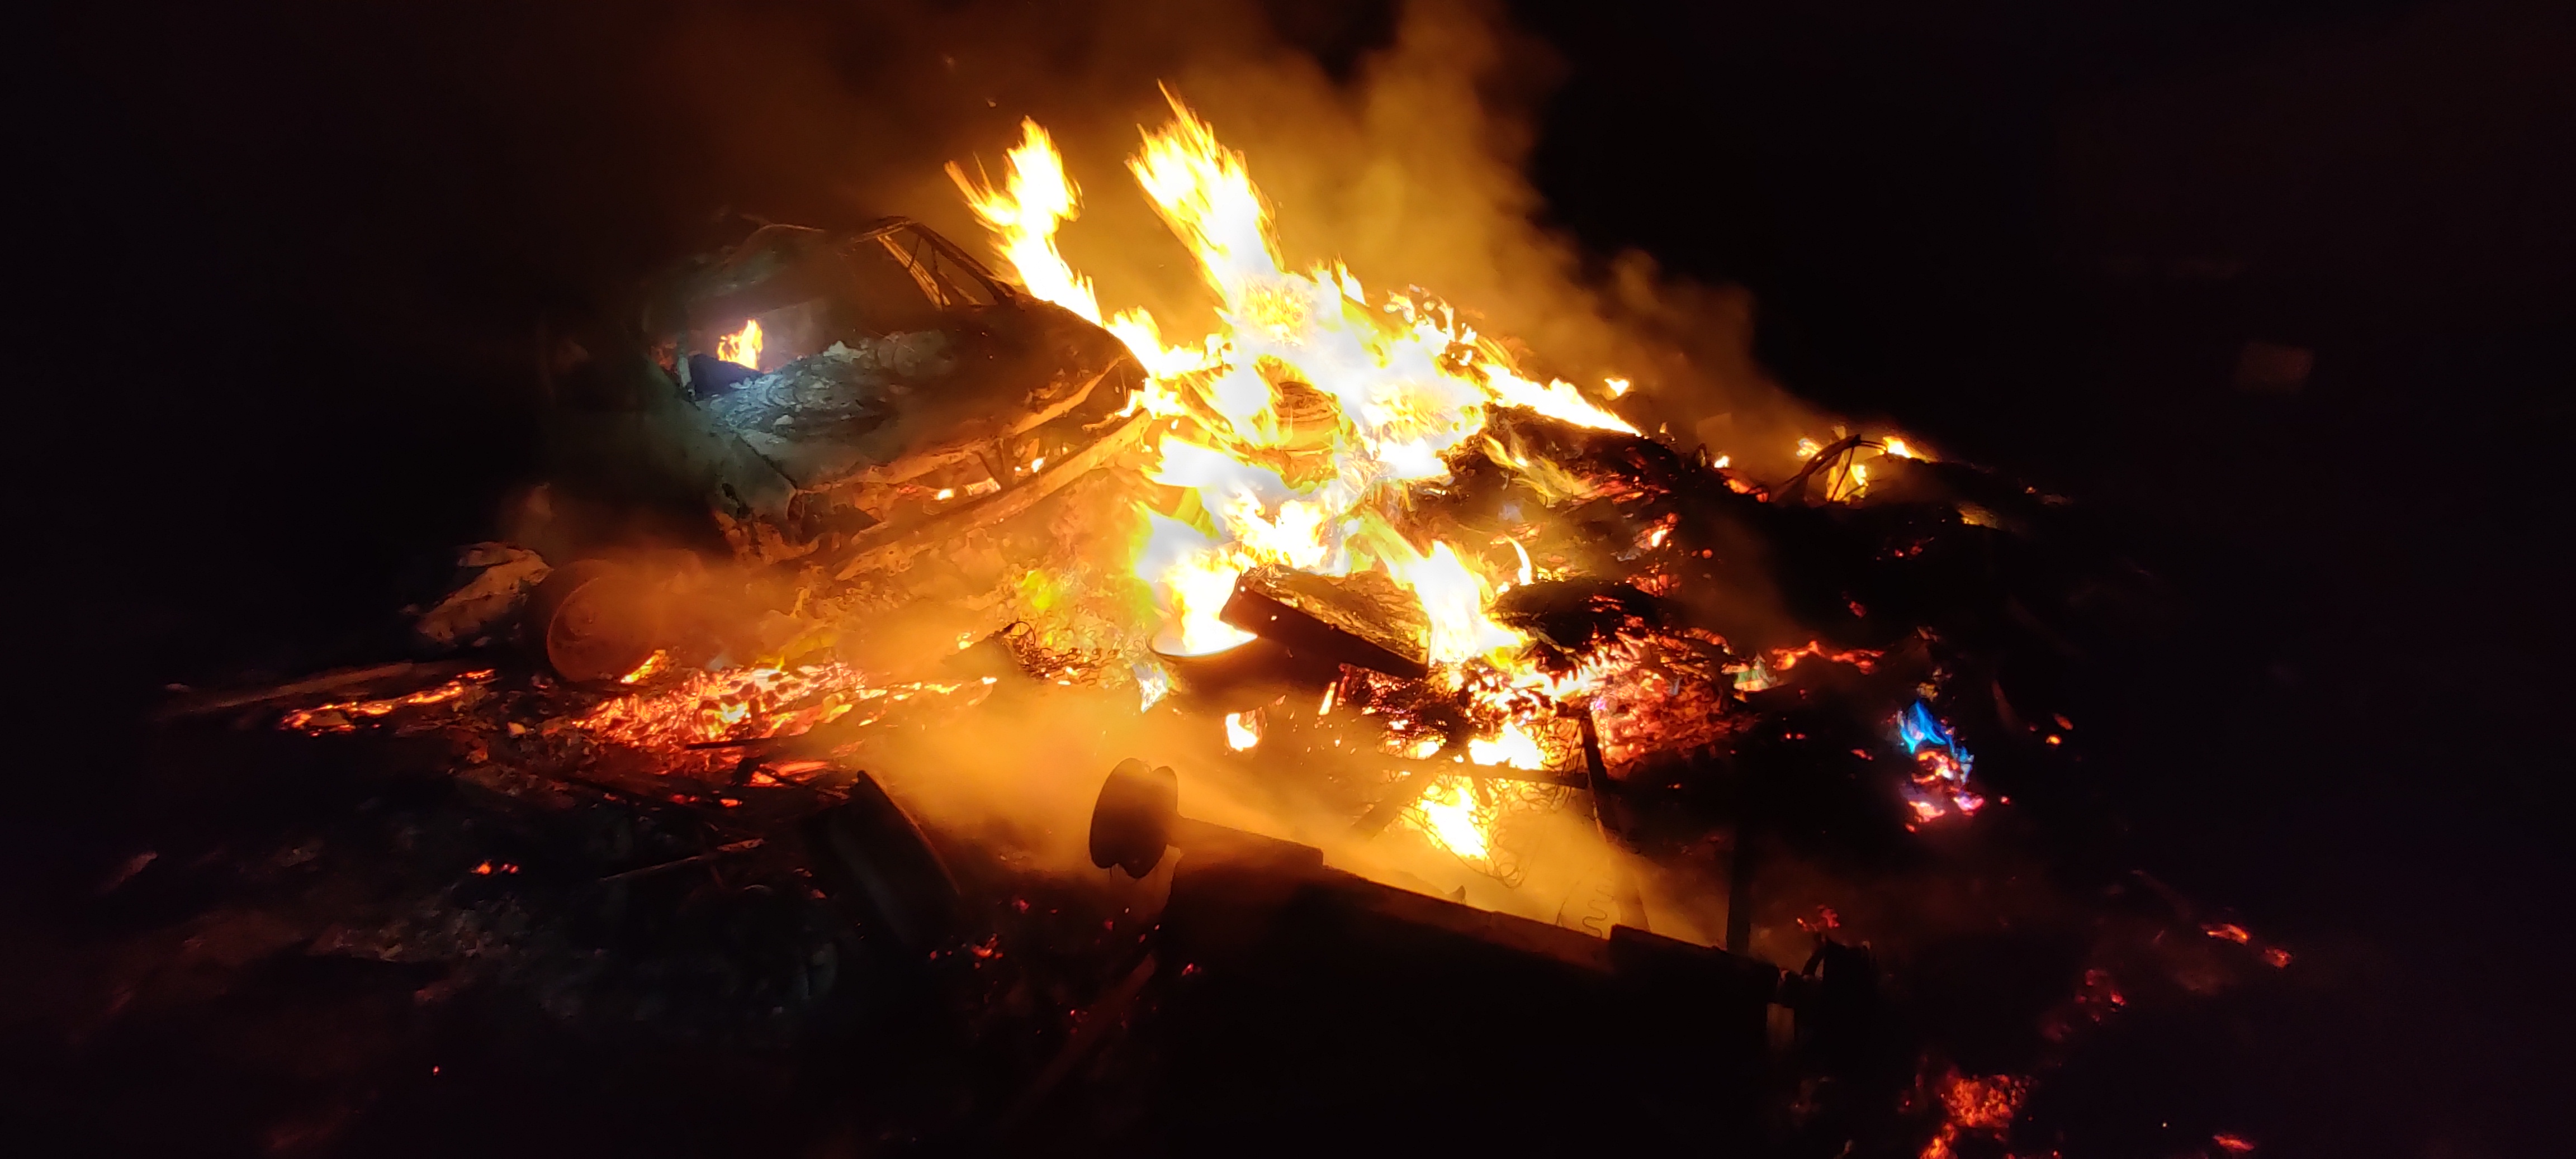 No excuse for illegally burning waste - Creating a better place